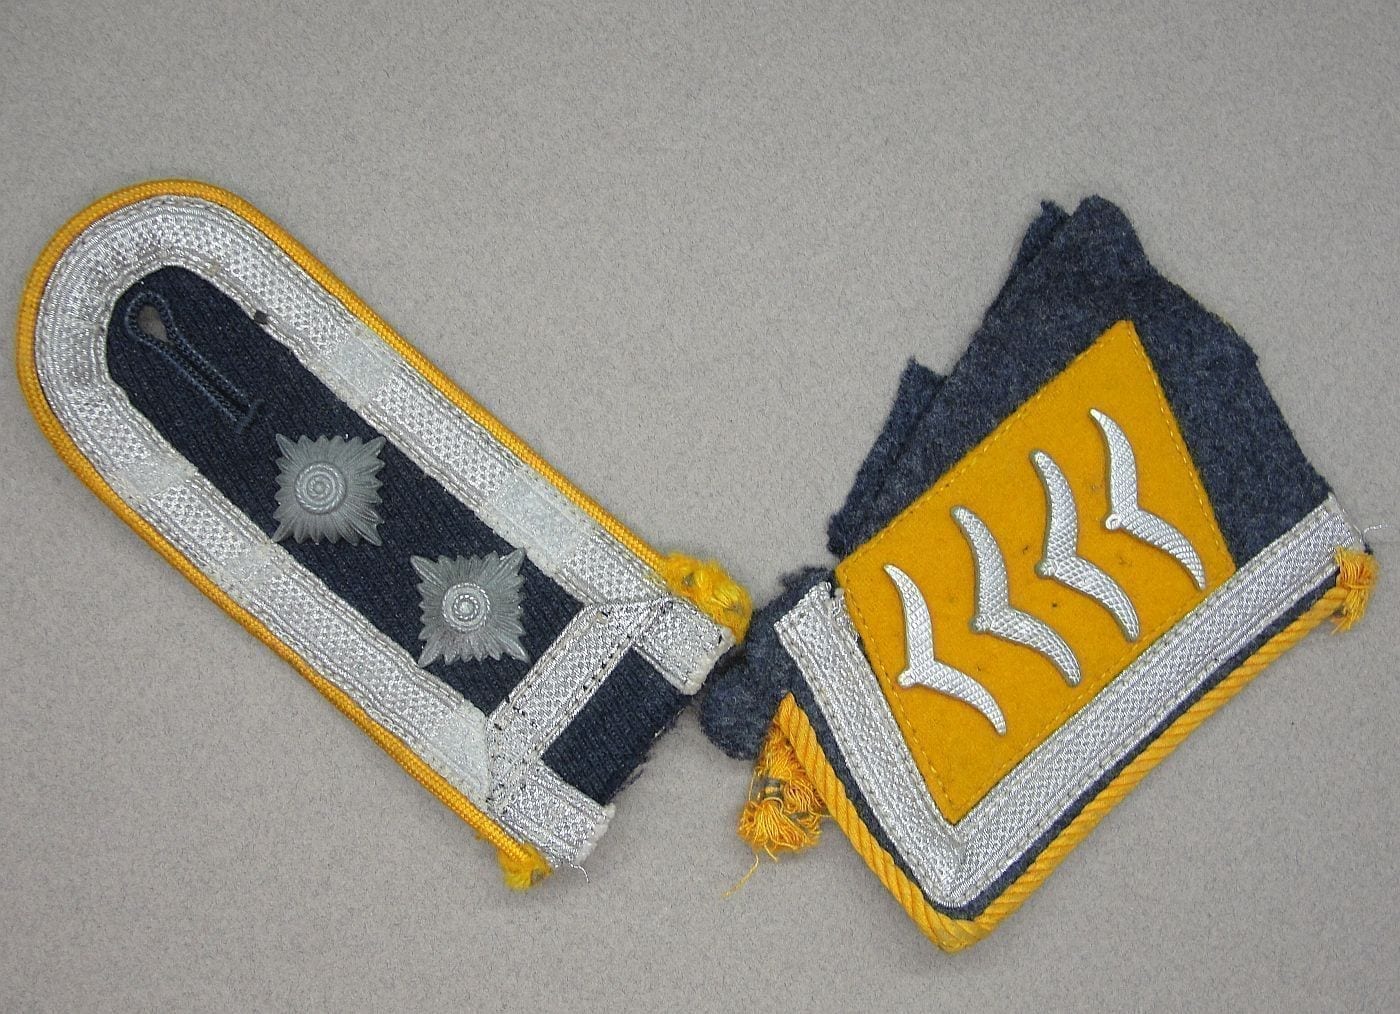 Luftwaffe Collar Tab and Shoulder Board from Same Tunic